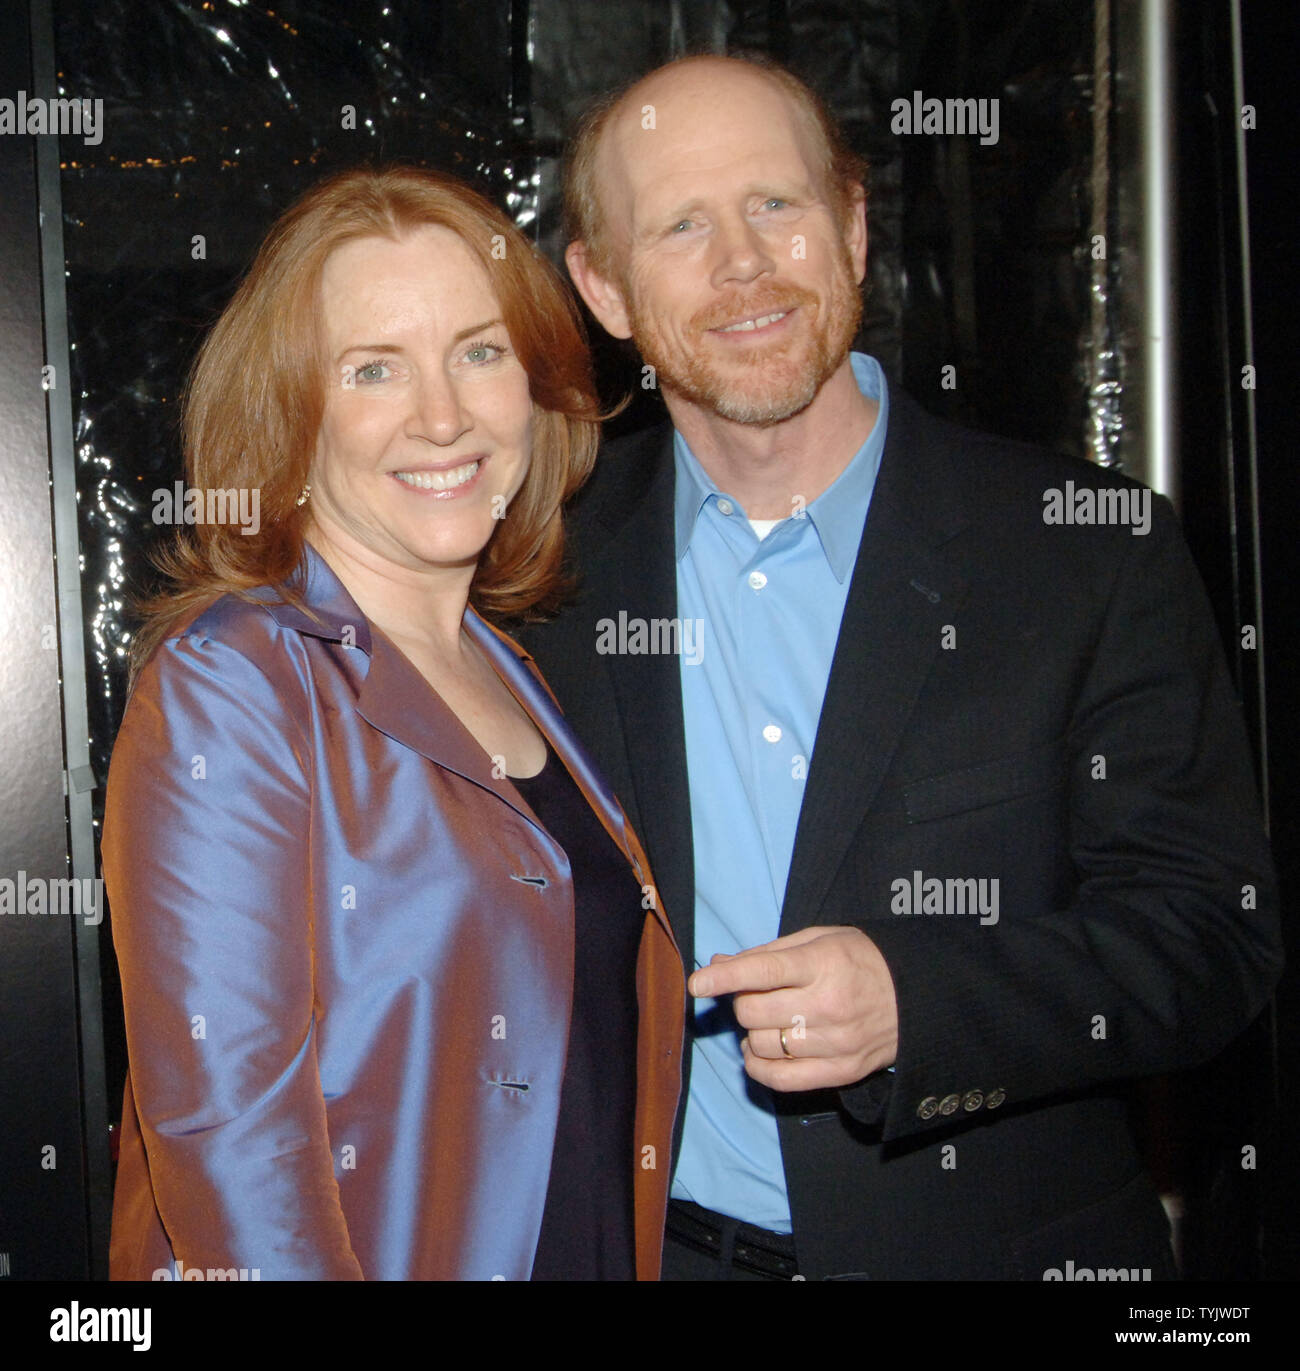 Actor/director Ron Howard and wife arrive for the New York premiere of ...